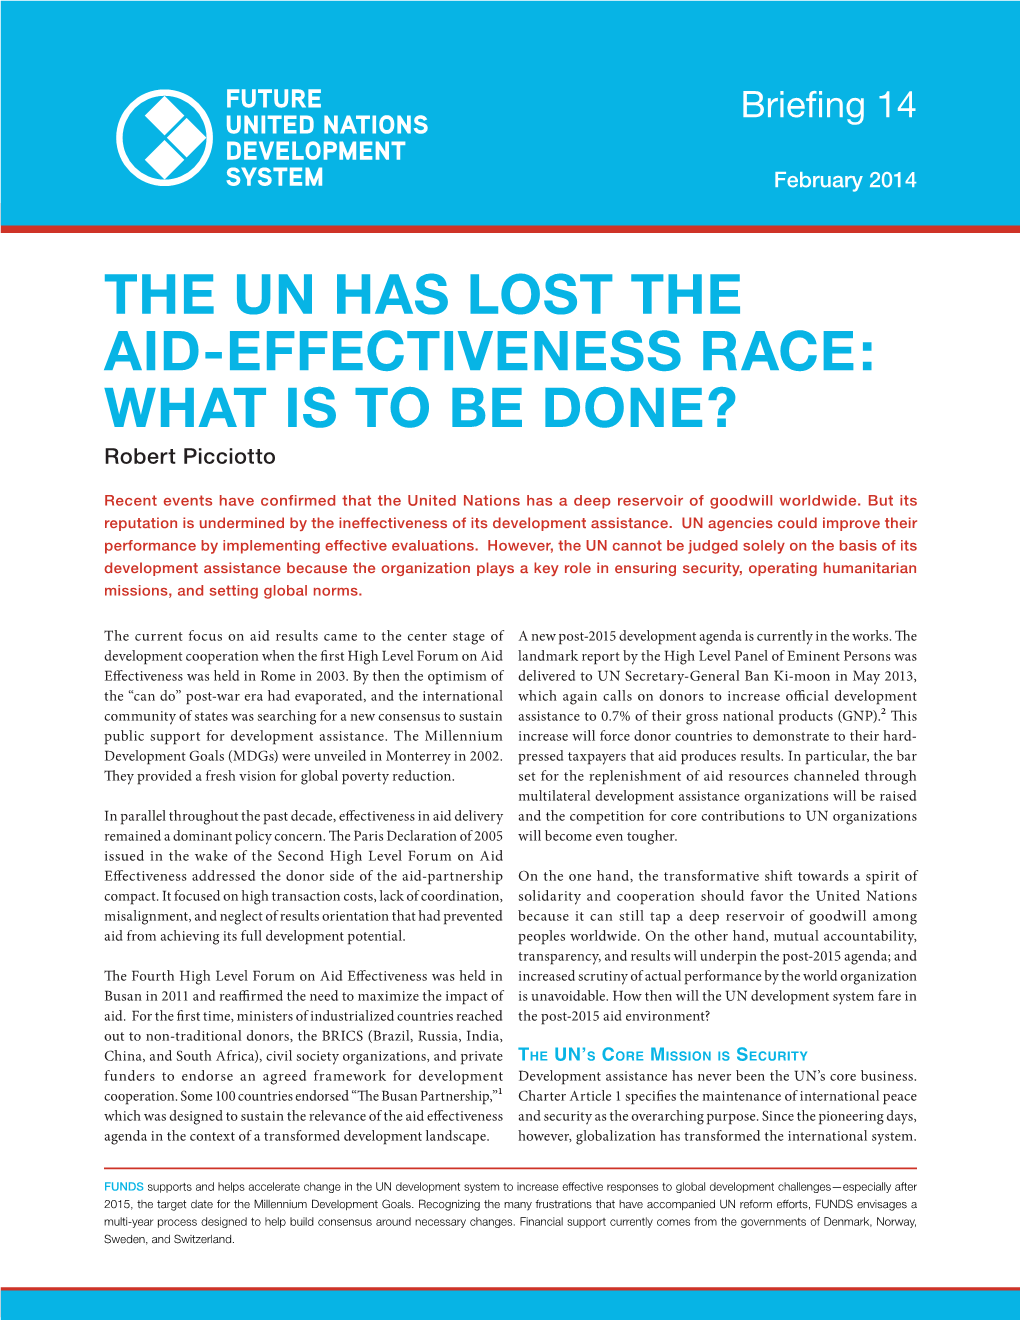 THE UN HAS LOST the AID-EFFECTIVENESS RACE: WHAT IS to BE DONE? Robert Picciotto